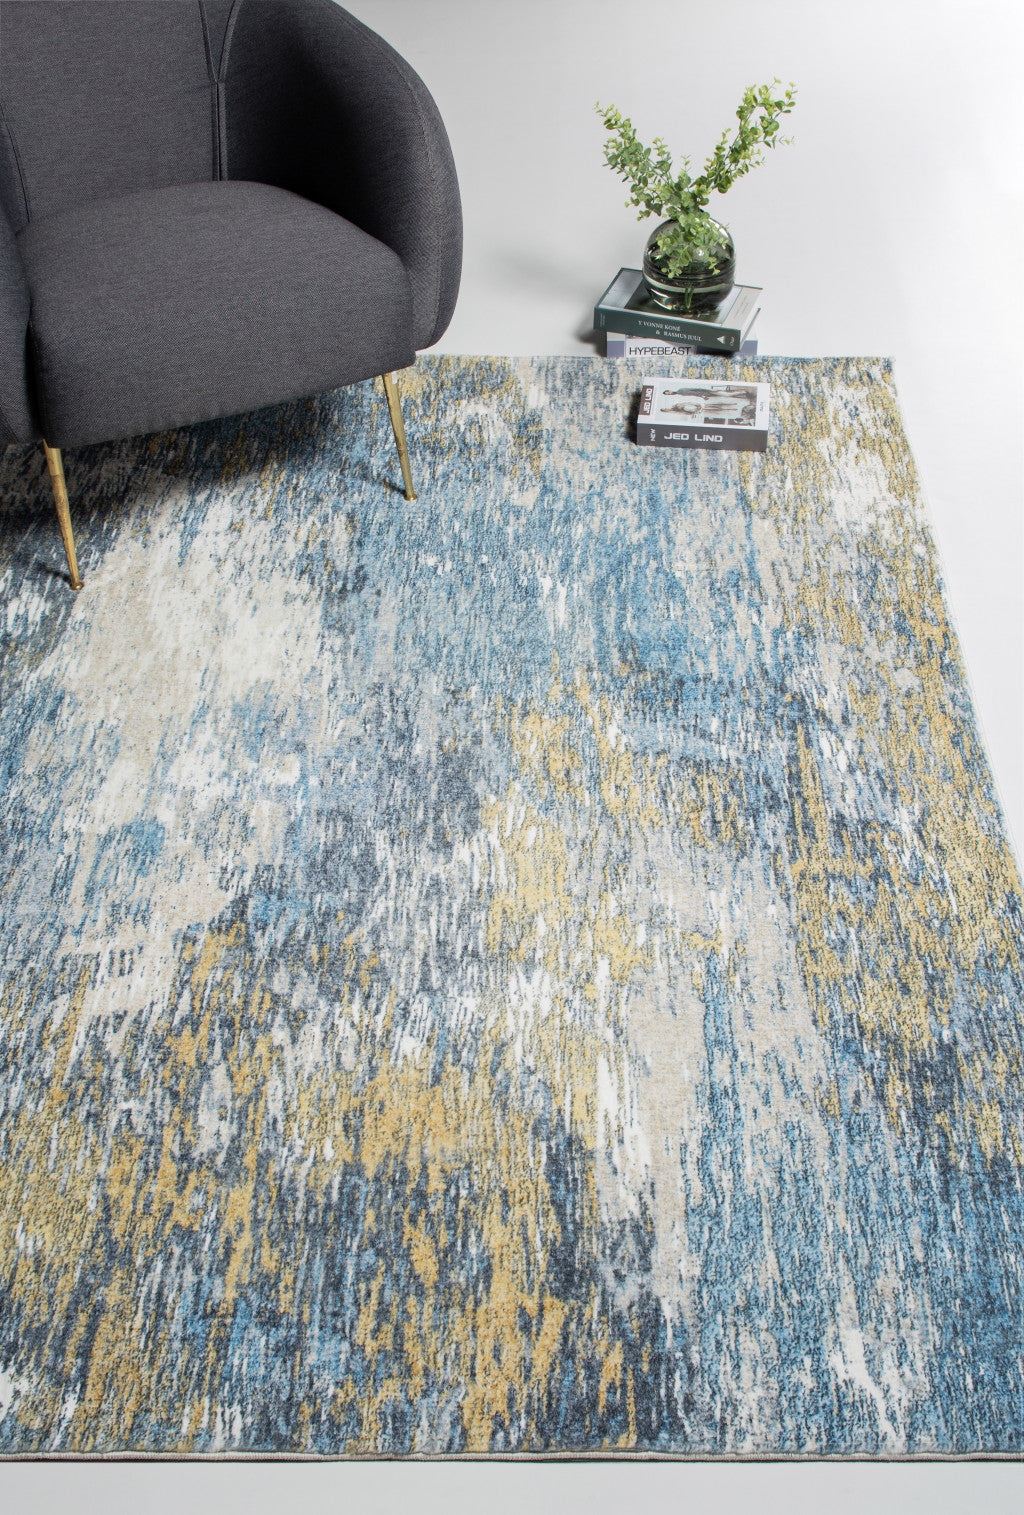 8’ x 10’ Blue Gold Abstract Painting Modern Area Rug